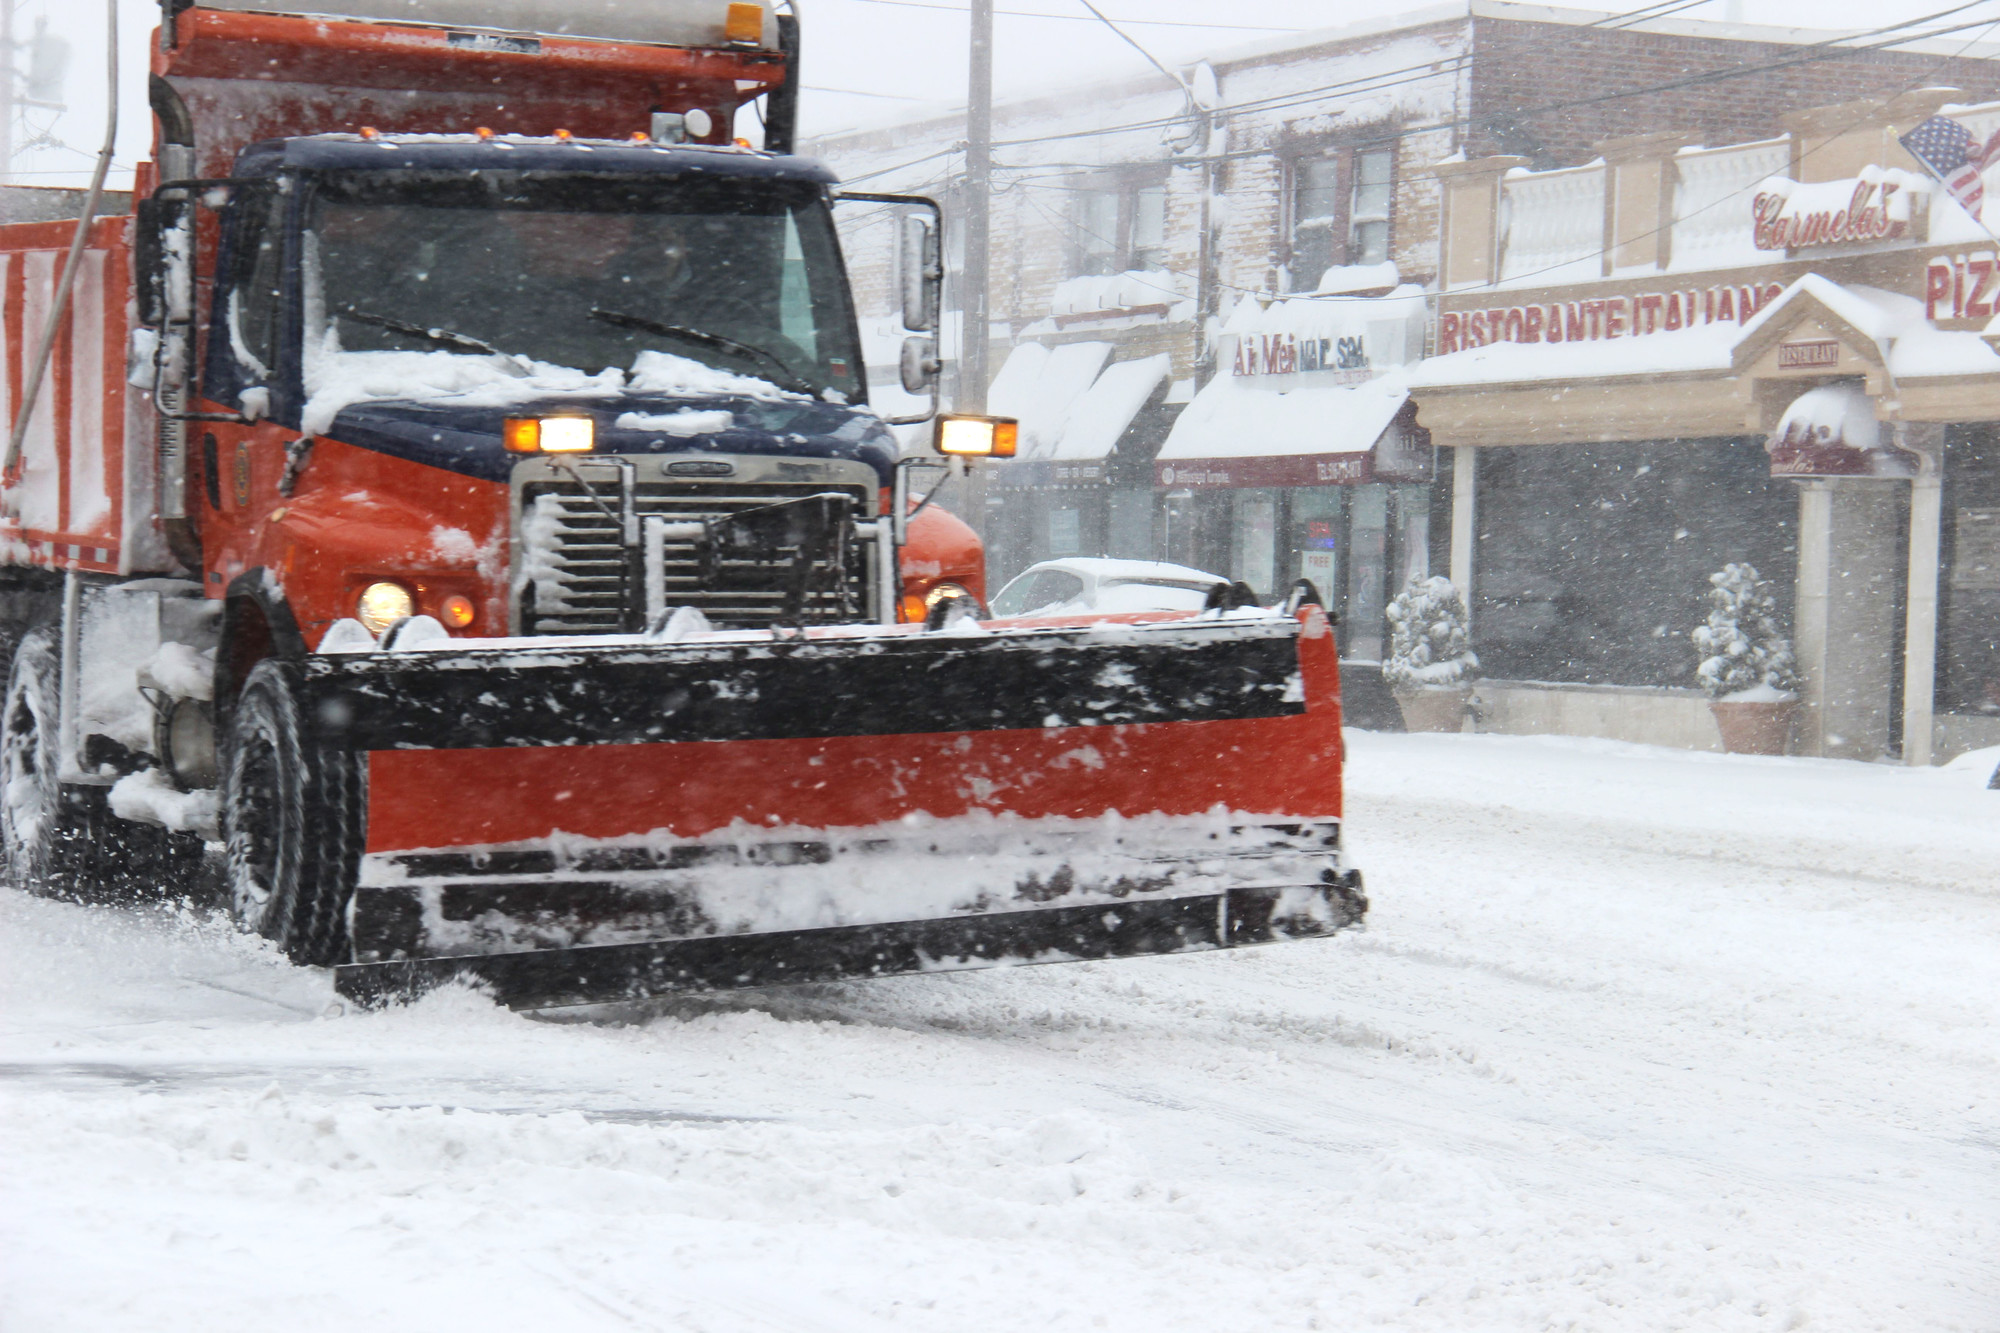 Nassau County did a good job of plowing snow in Franklin Square and Elmont, according to Elmont Fire Commissioner Joseph Balleta. (Courtesy Heather Magone)